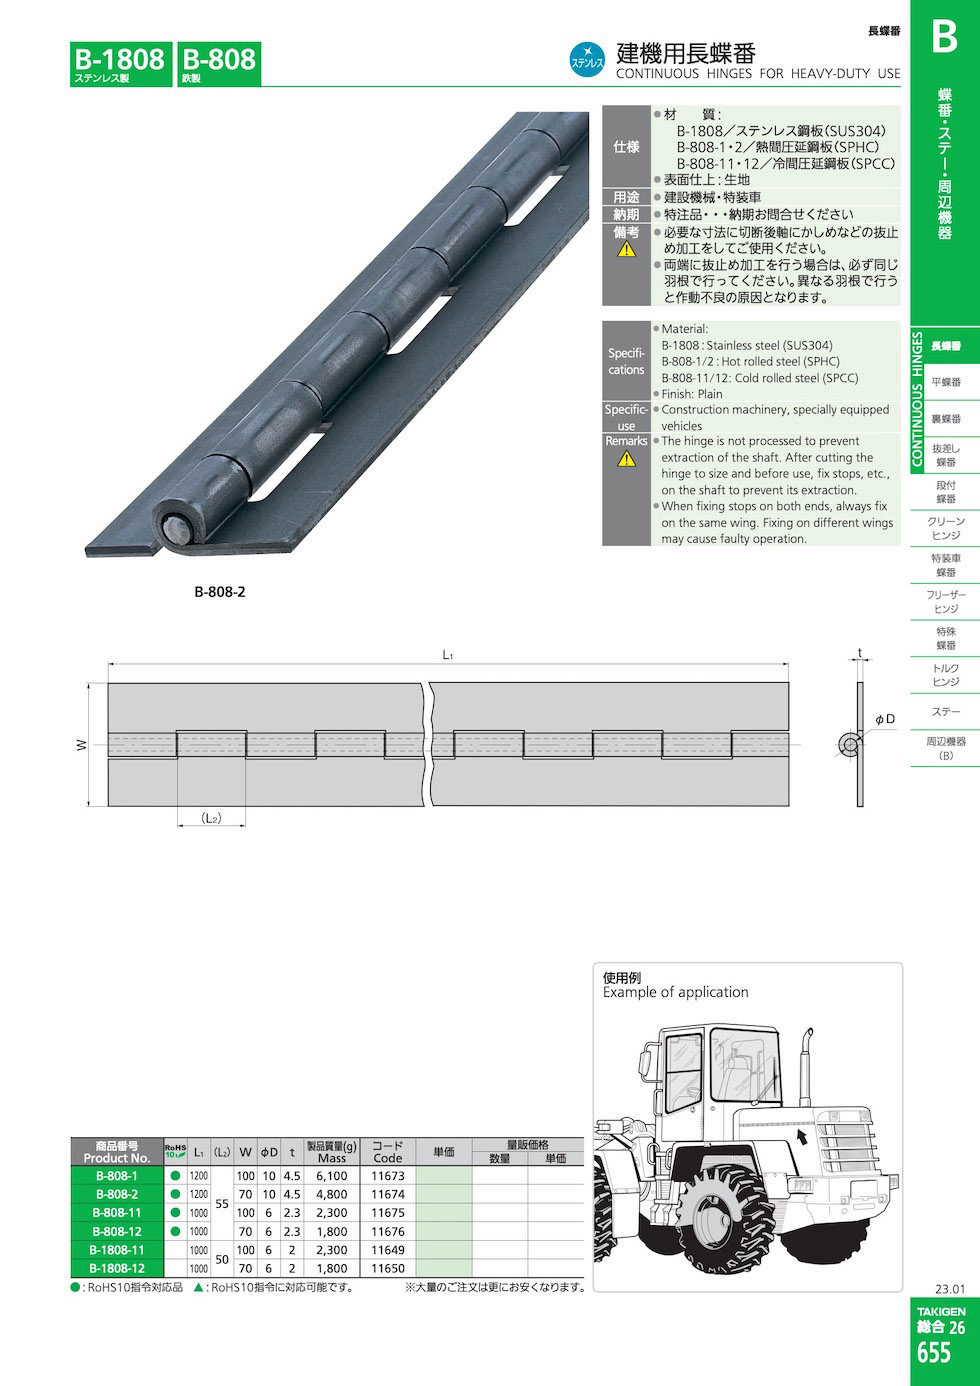 CONTINUOUS HINGES FOR HEAVY-DUTY USE